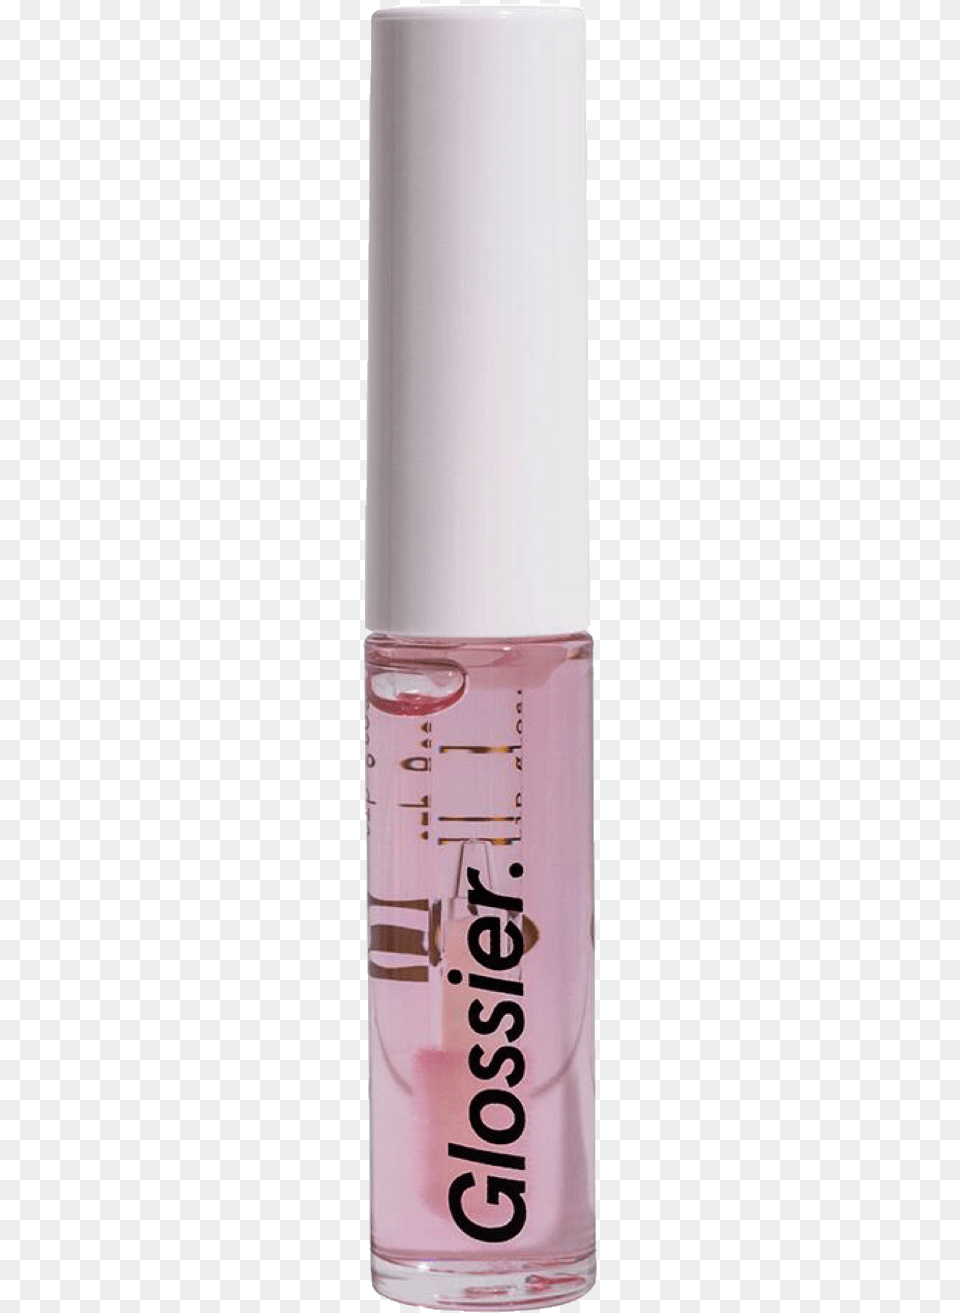 Report Abuse Glossier Clear Lip Gloss, Bottle, Cosmetics, Perfume, Can Png Image